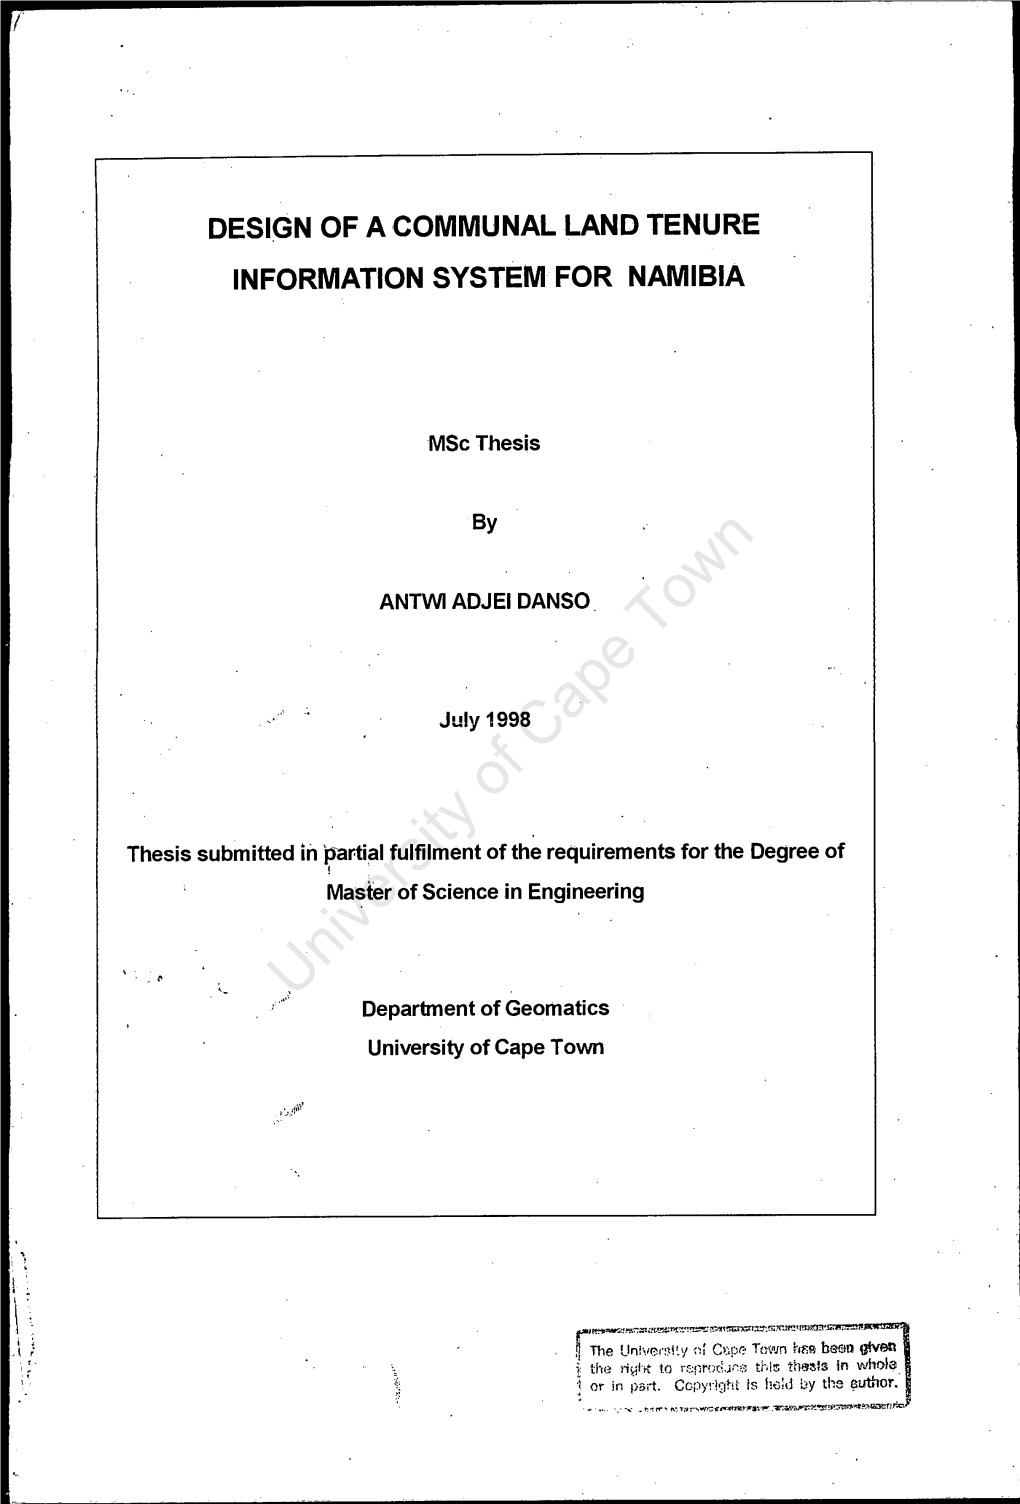 Design of a Communal Land Tenure Information System for Namibia